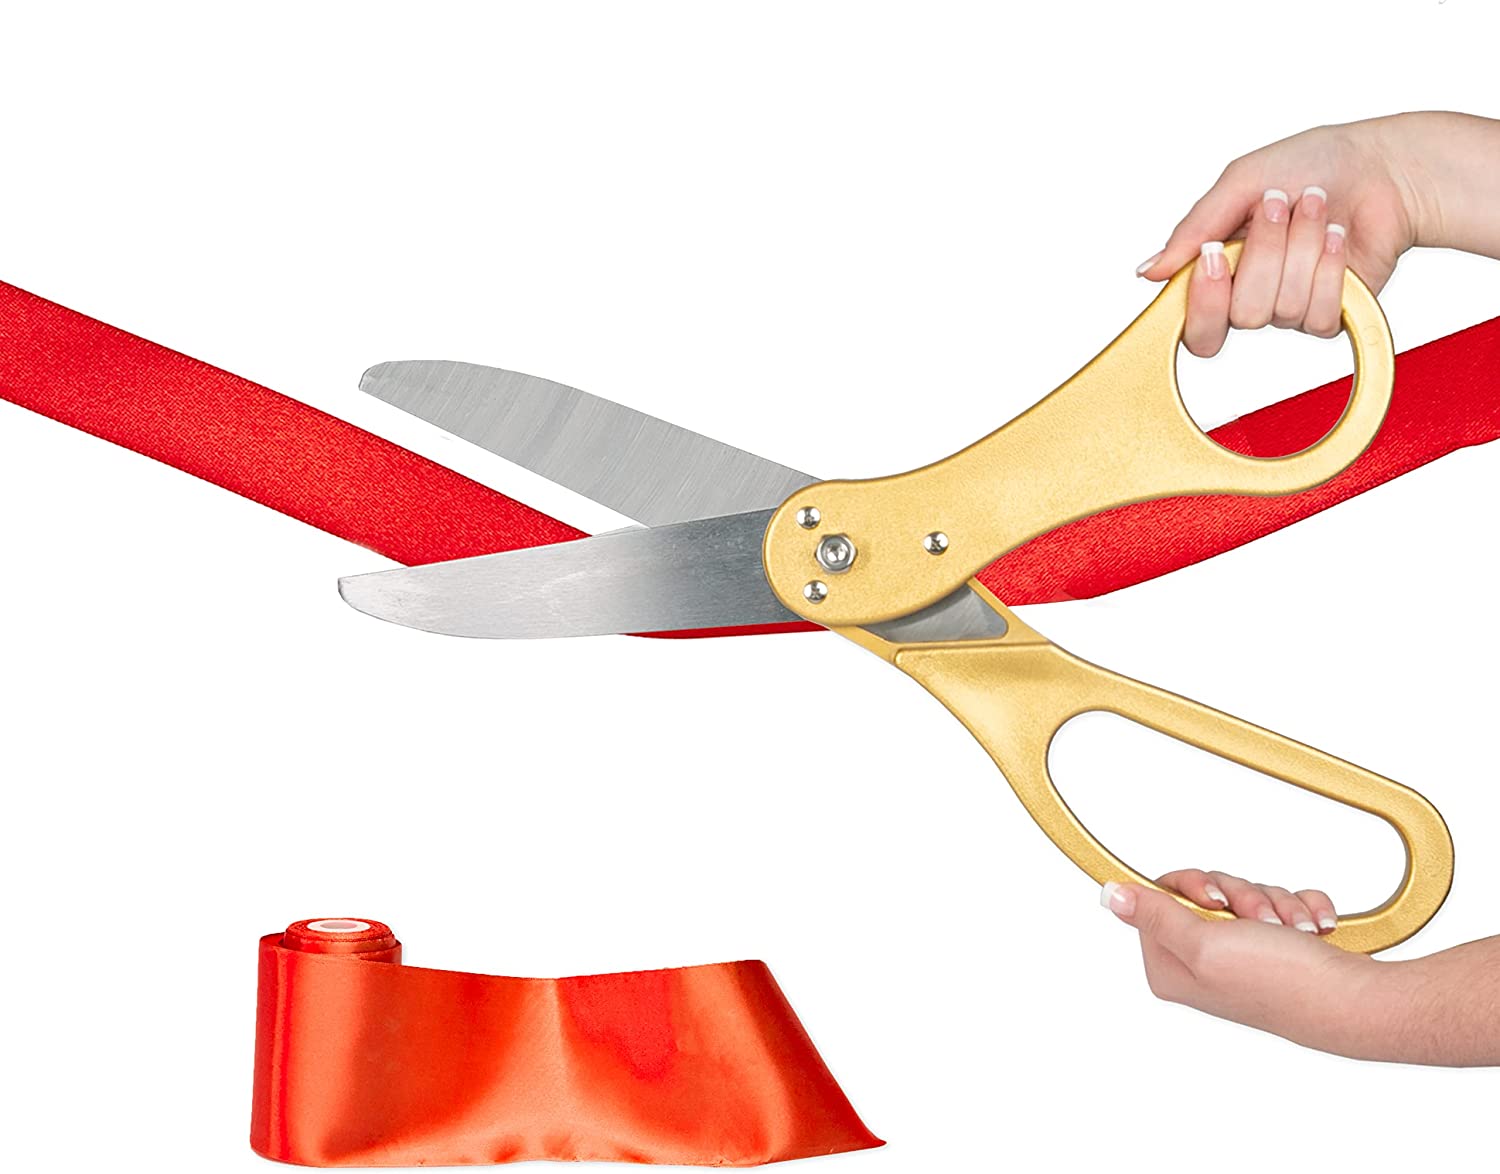 Crutello Giant Ribbon Cutting Ceremony Kit 21" Giant Scissor Set with Sharp, Gold Handled Durable XL Scissors, and 30 Feet of Oversized 4" Wide Red Ribbon